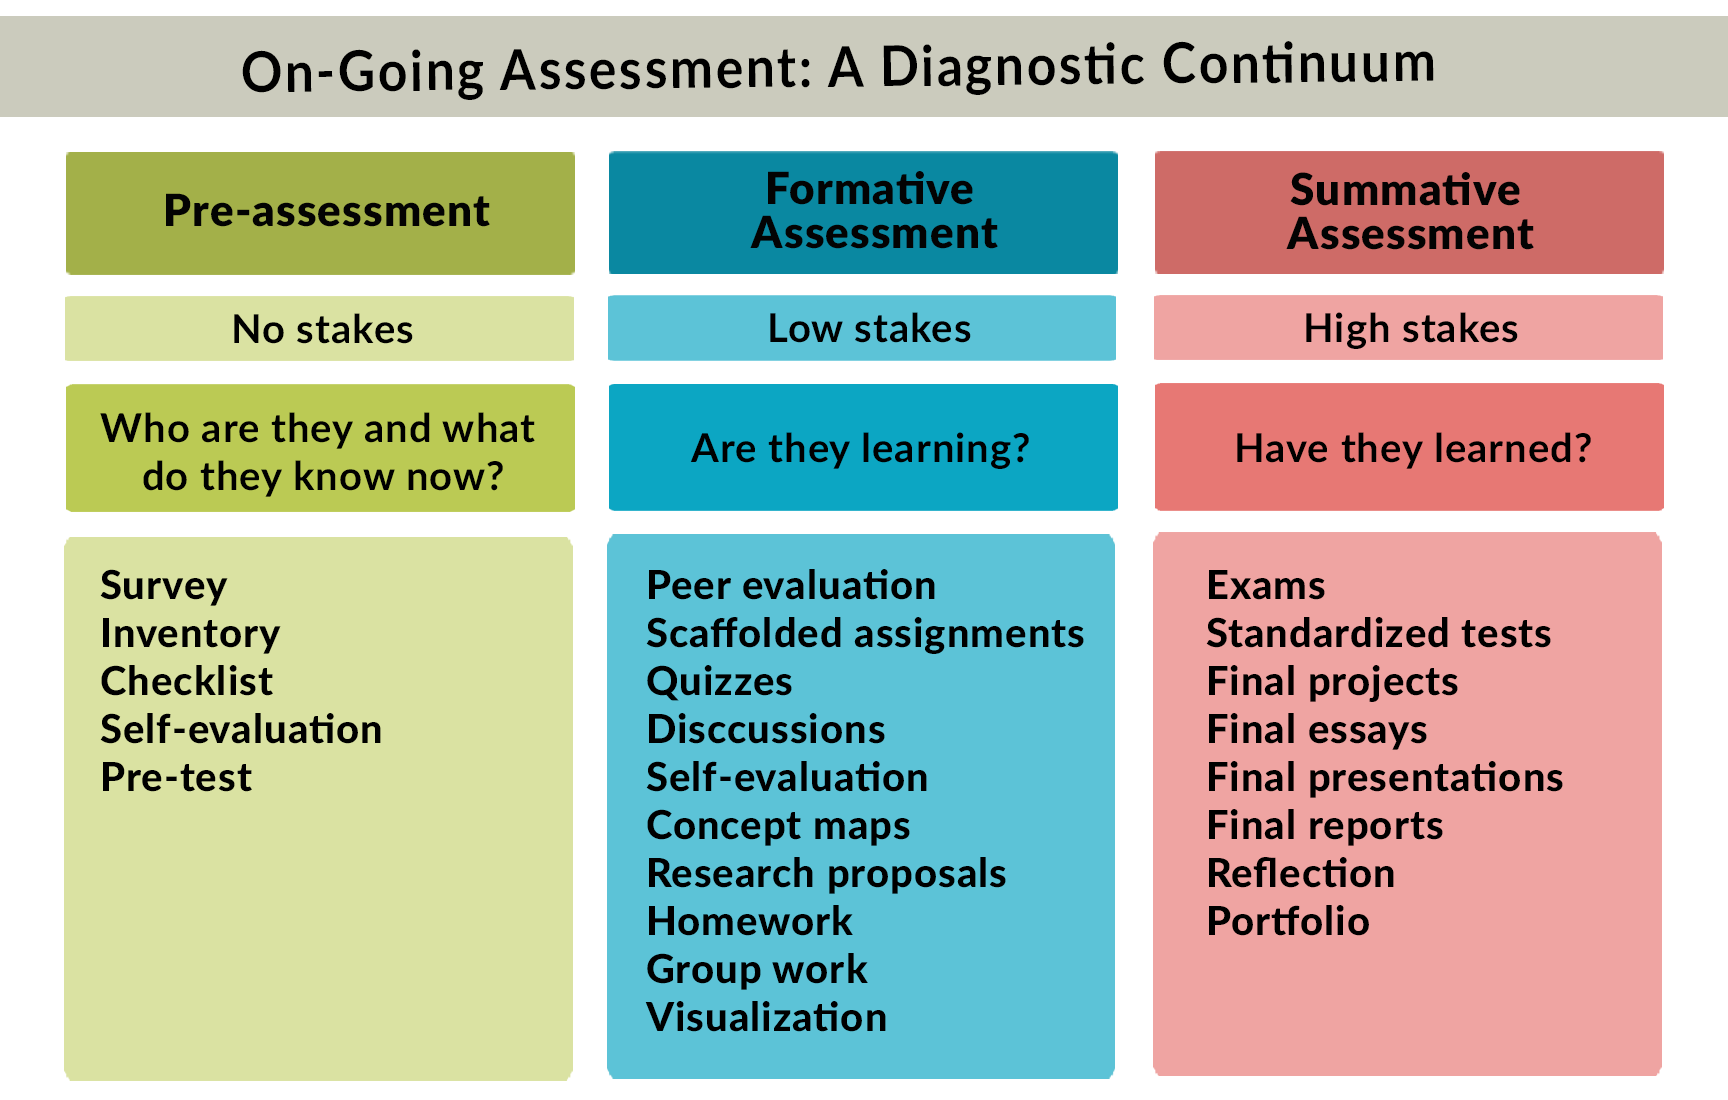 On-Going-Assessment-Preassessment-Formative-Summative